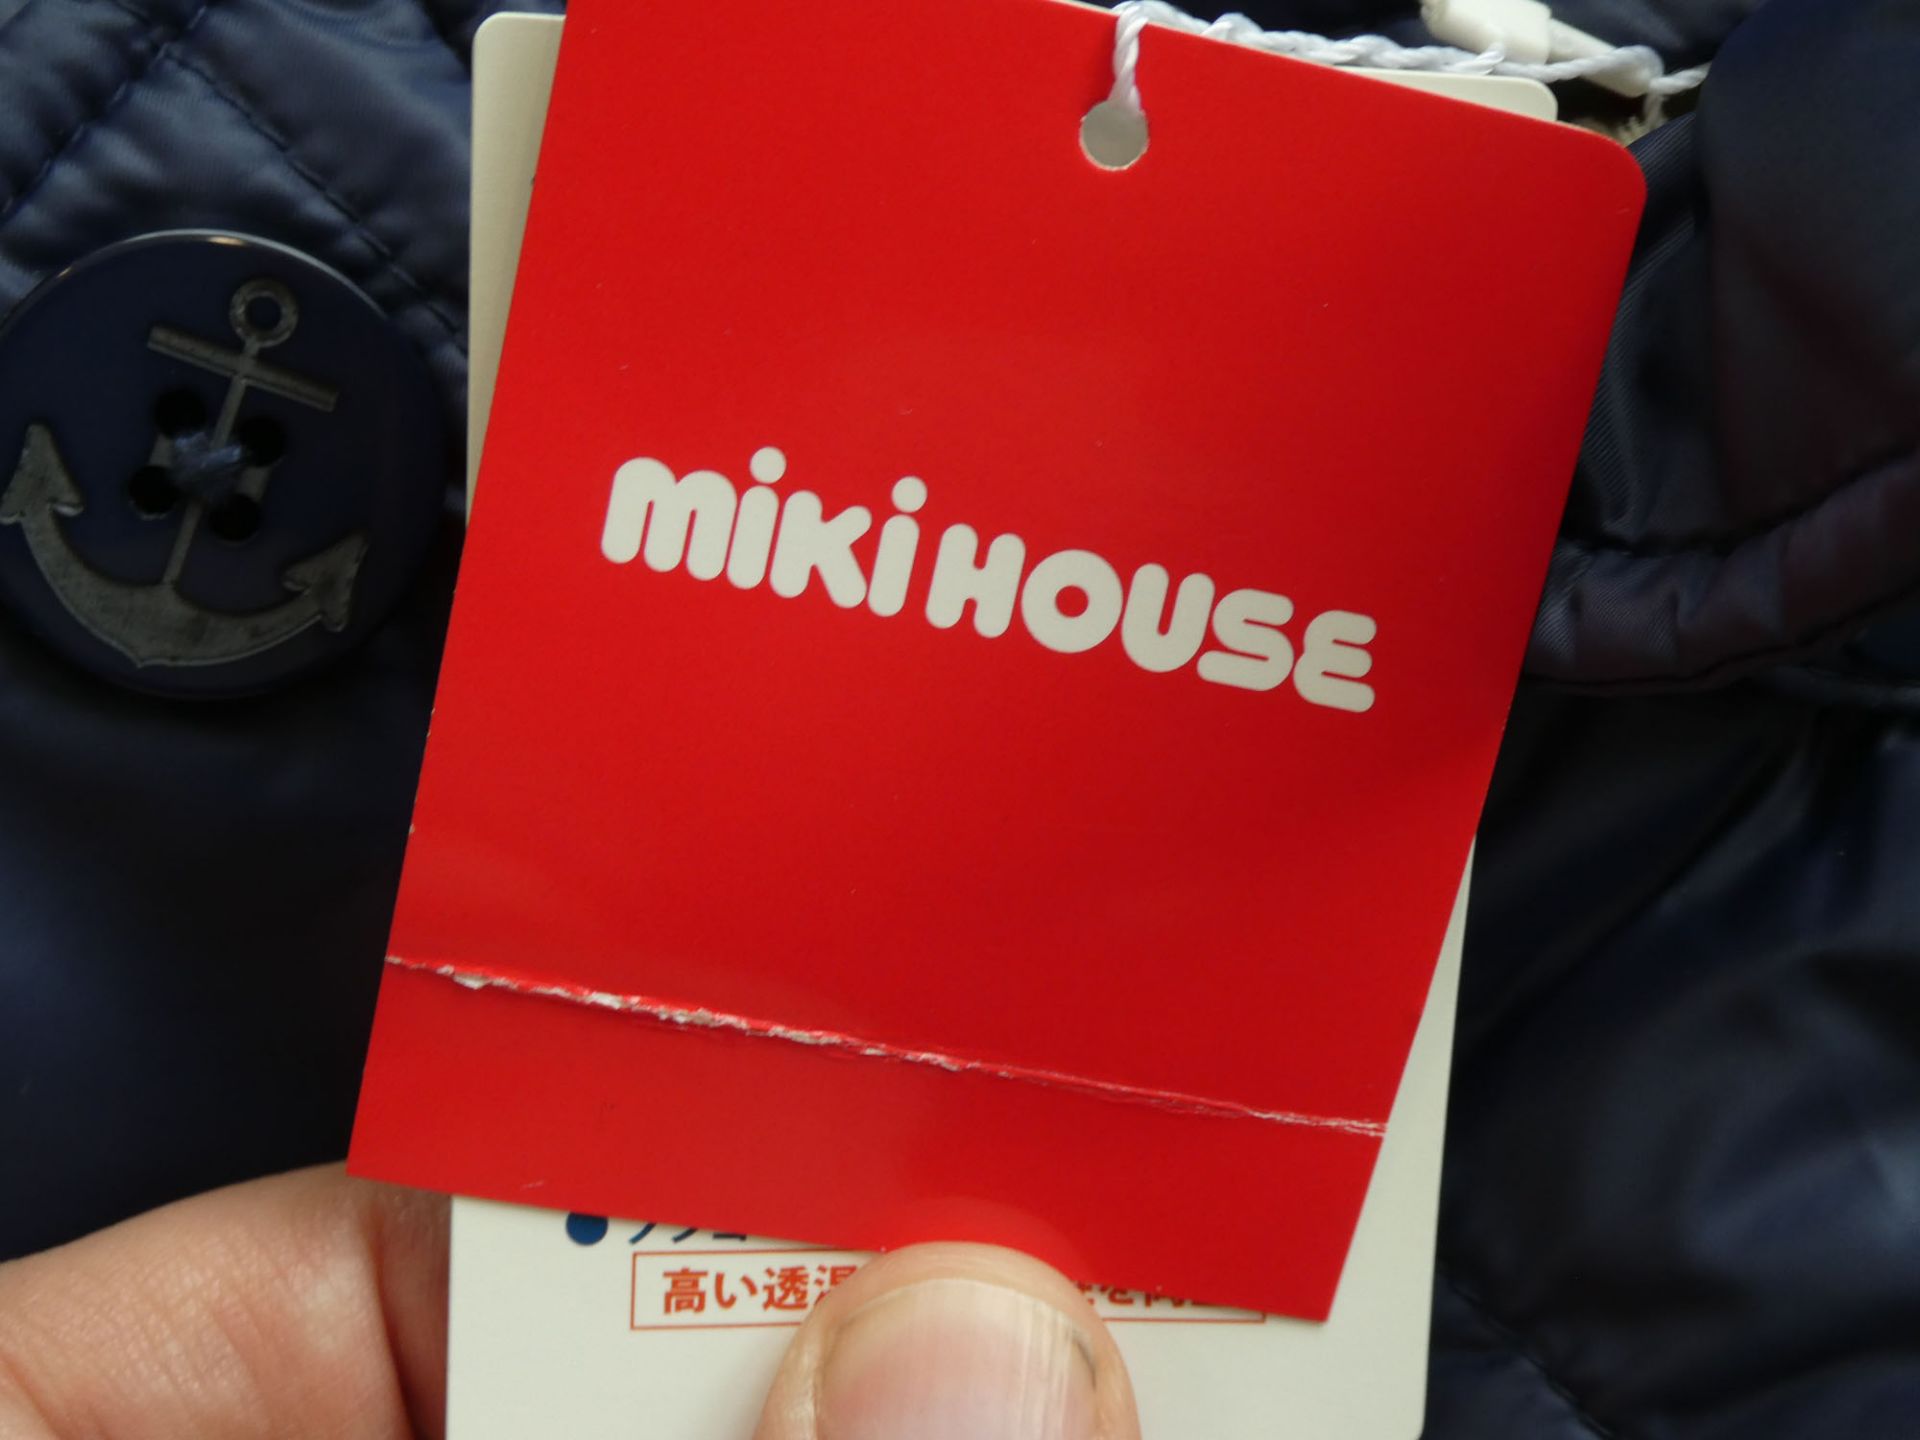 Miki House original 2 in 1 navy puffer jacket and fleece bodywarmer child's size 90 (2 years old) - Image 3 of 3